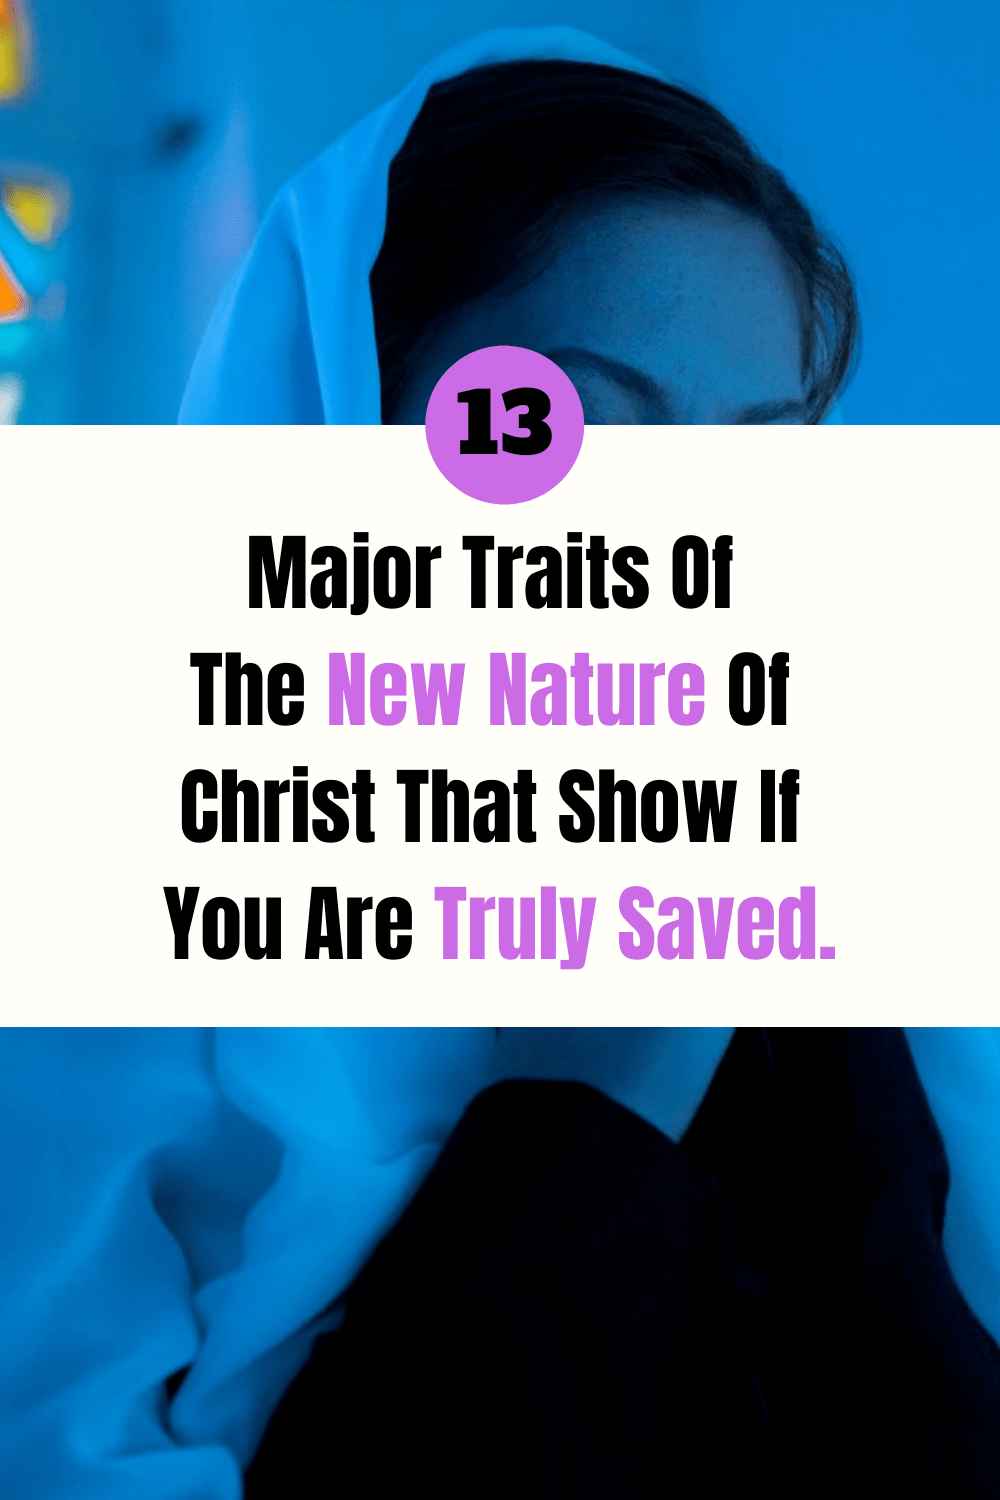 traits-of-the-new-nature-of-Christ